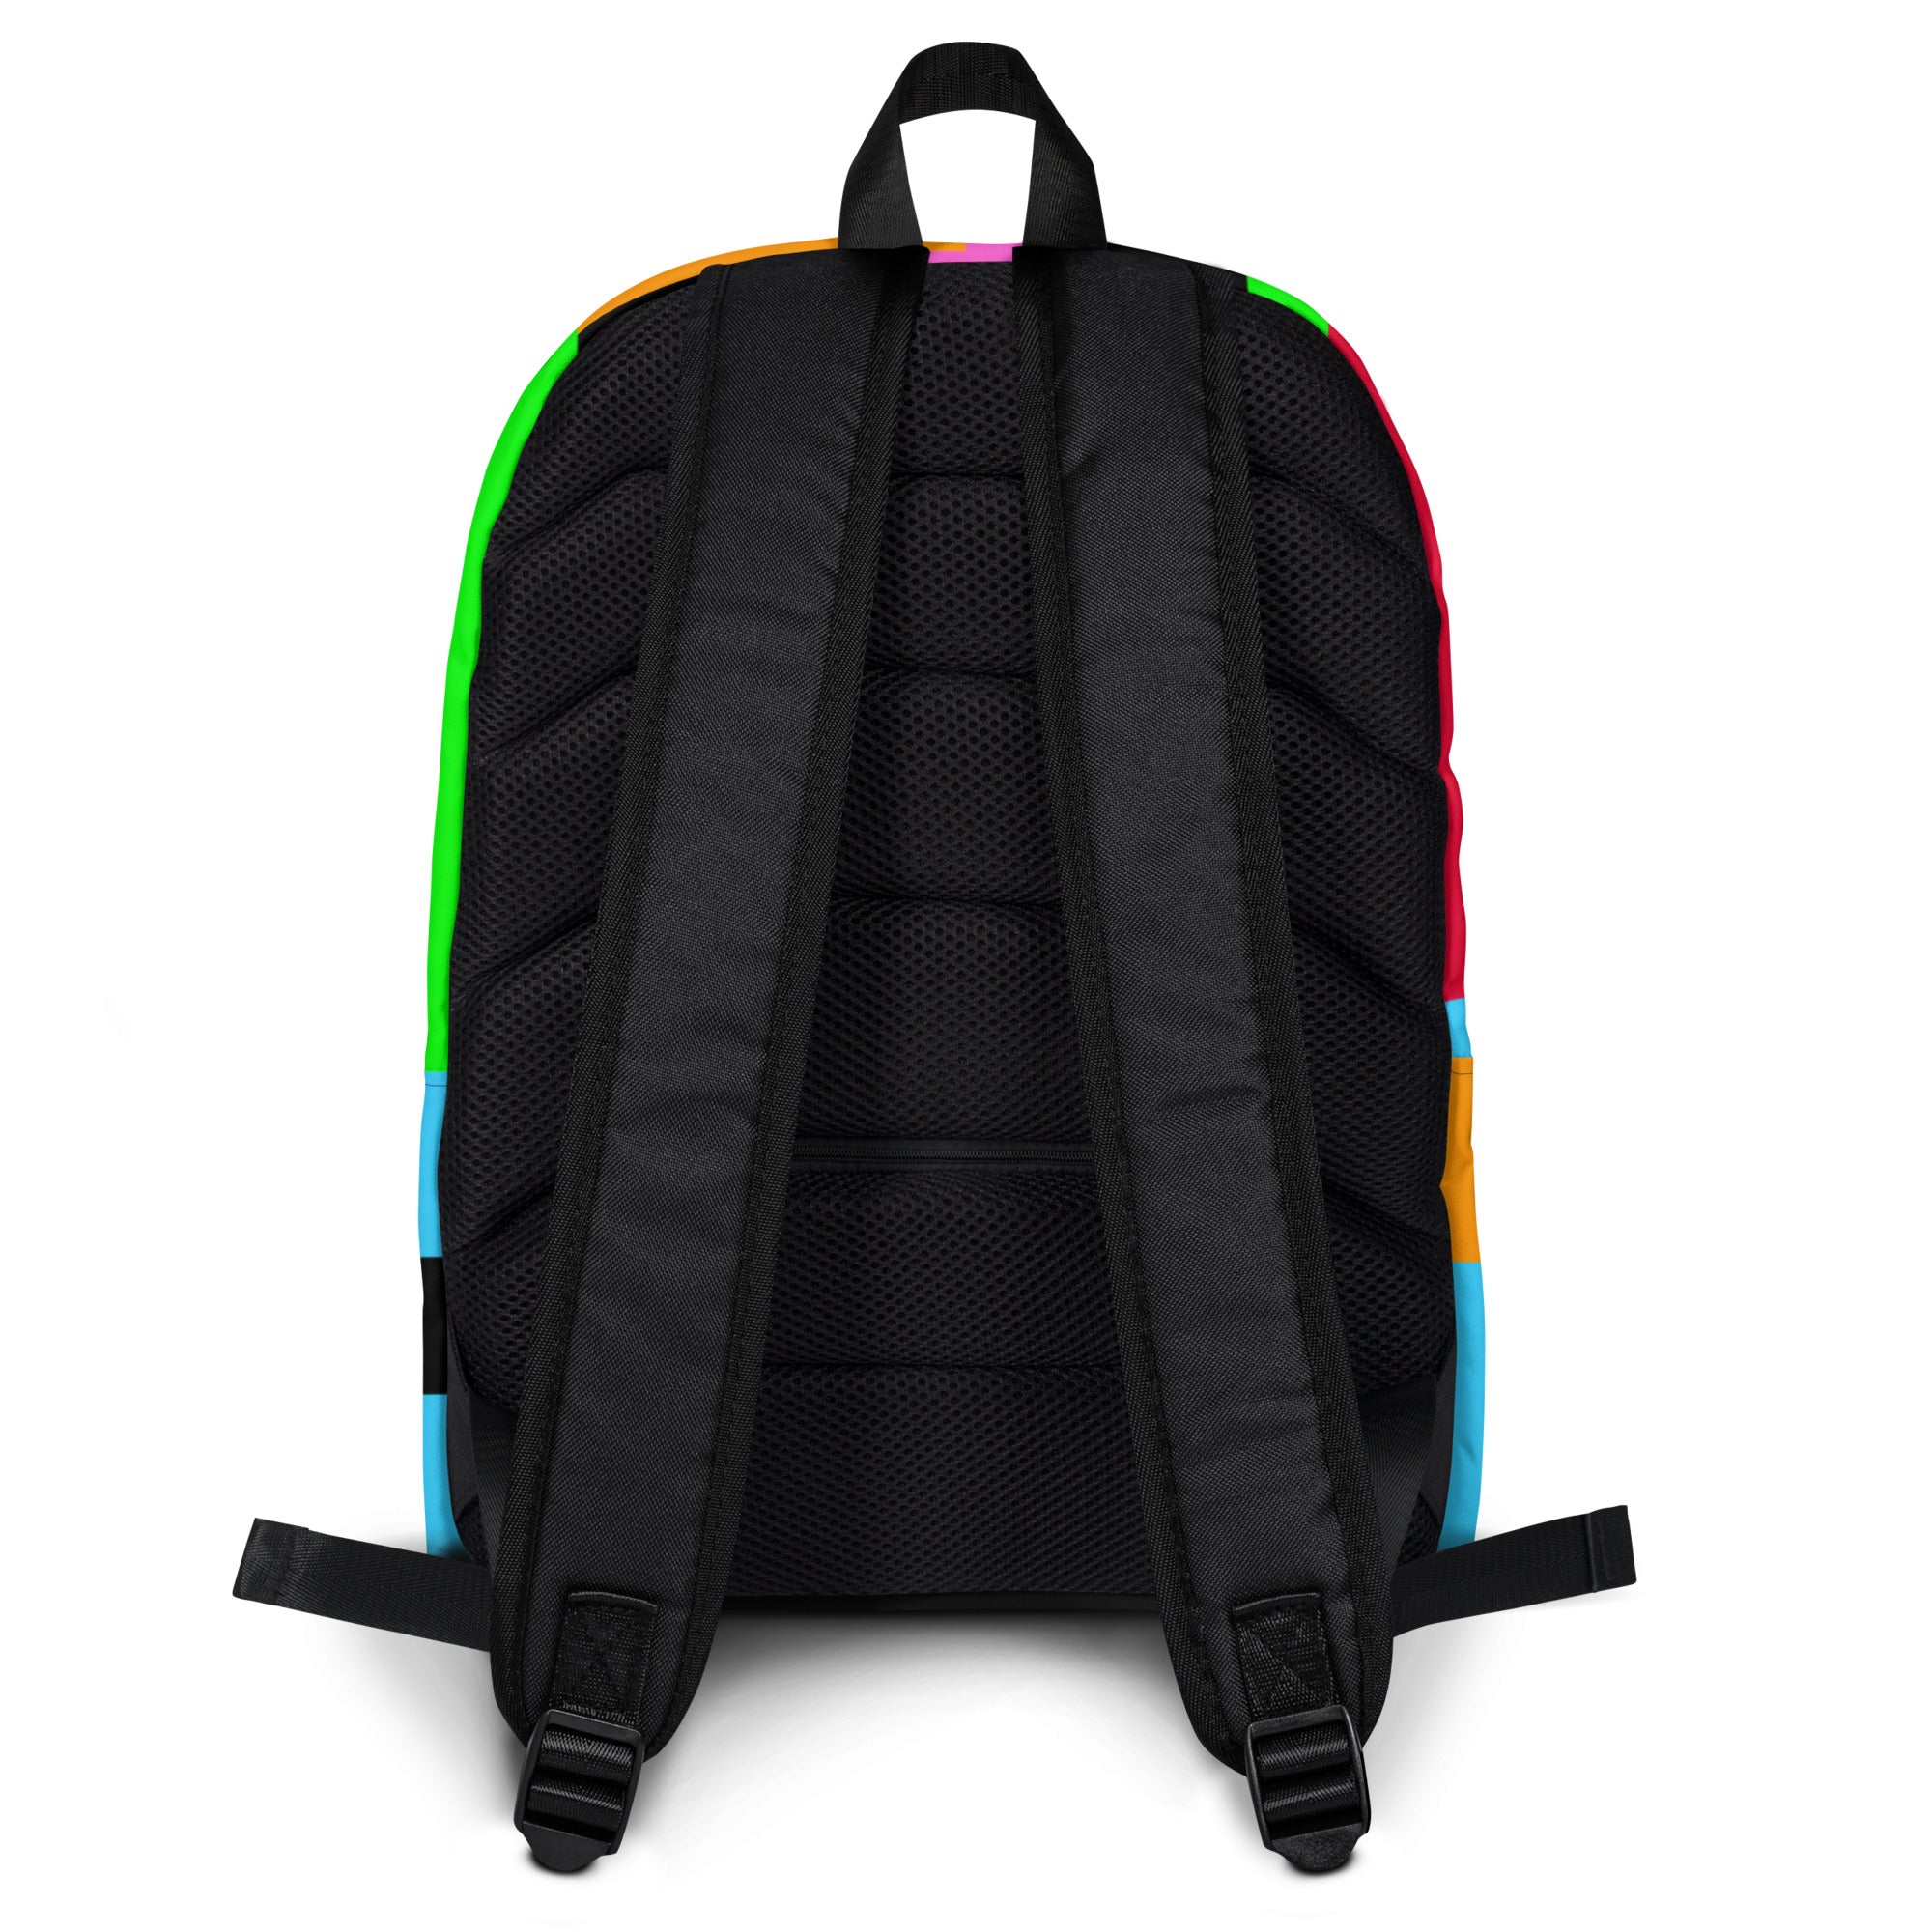 The Cube, Envy Backpack